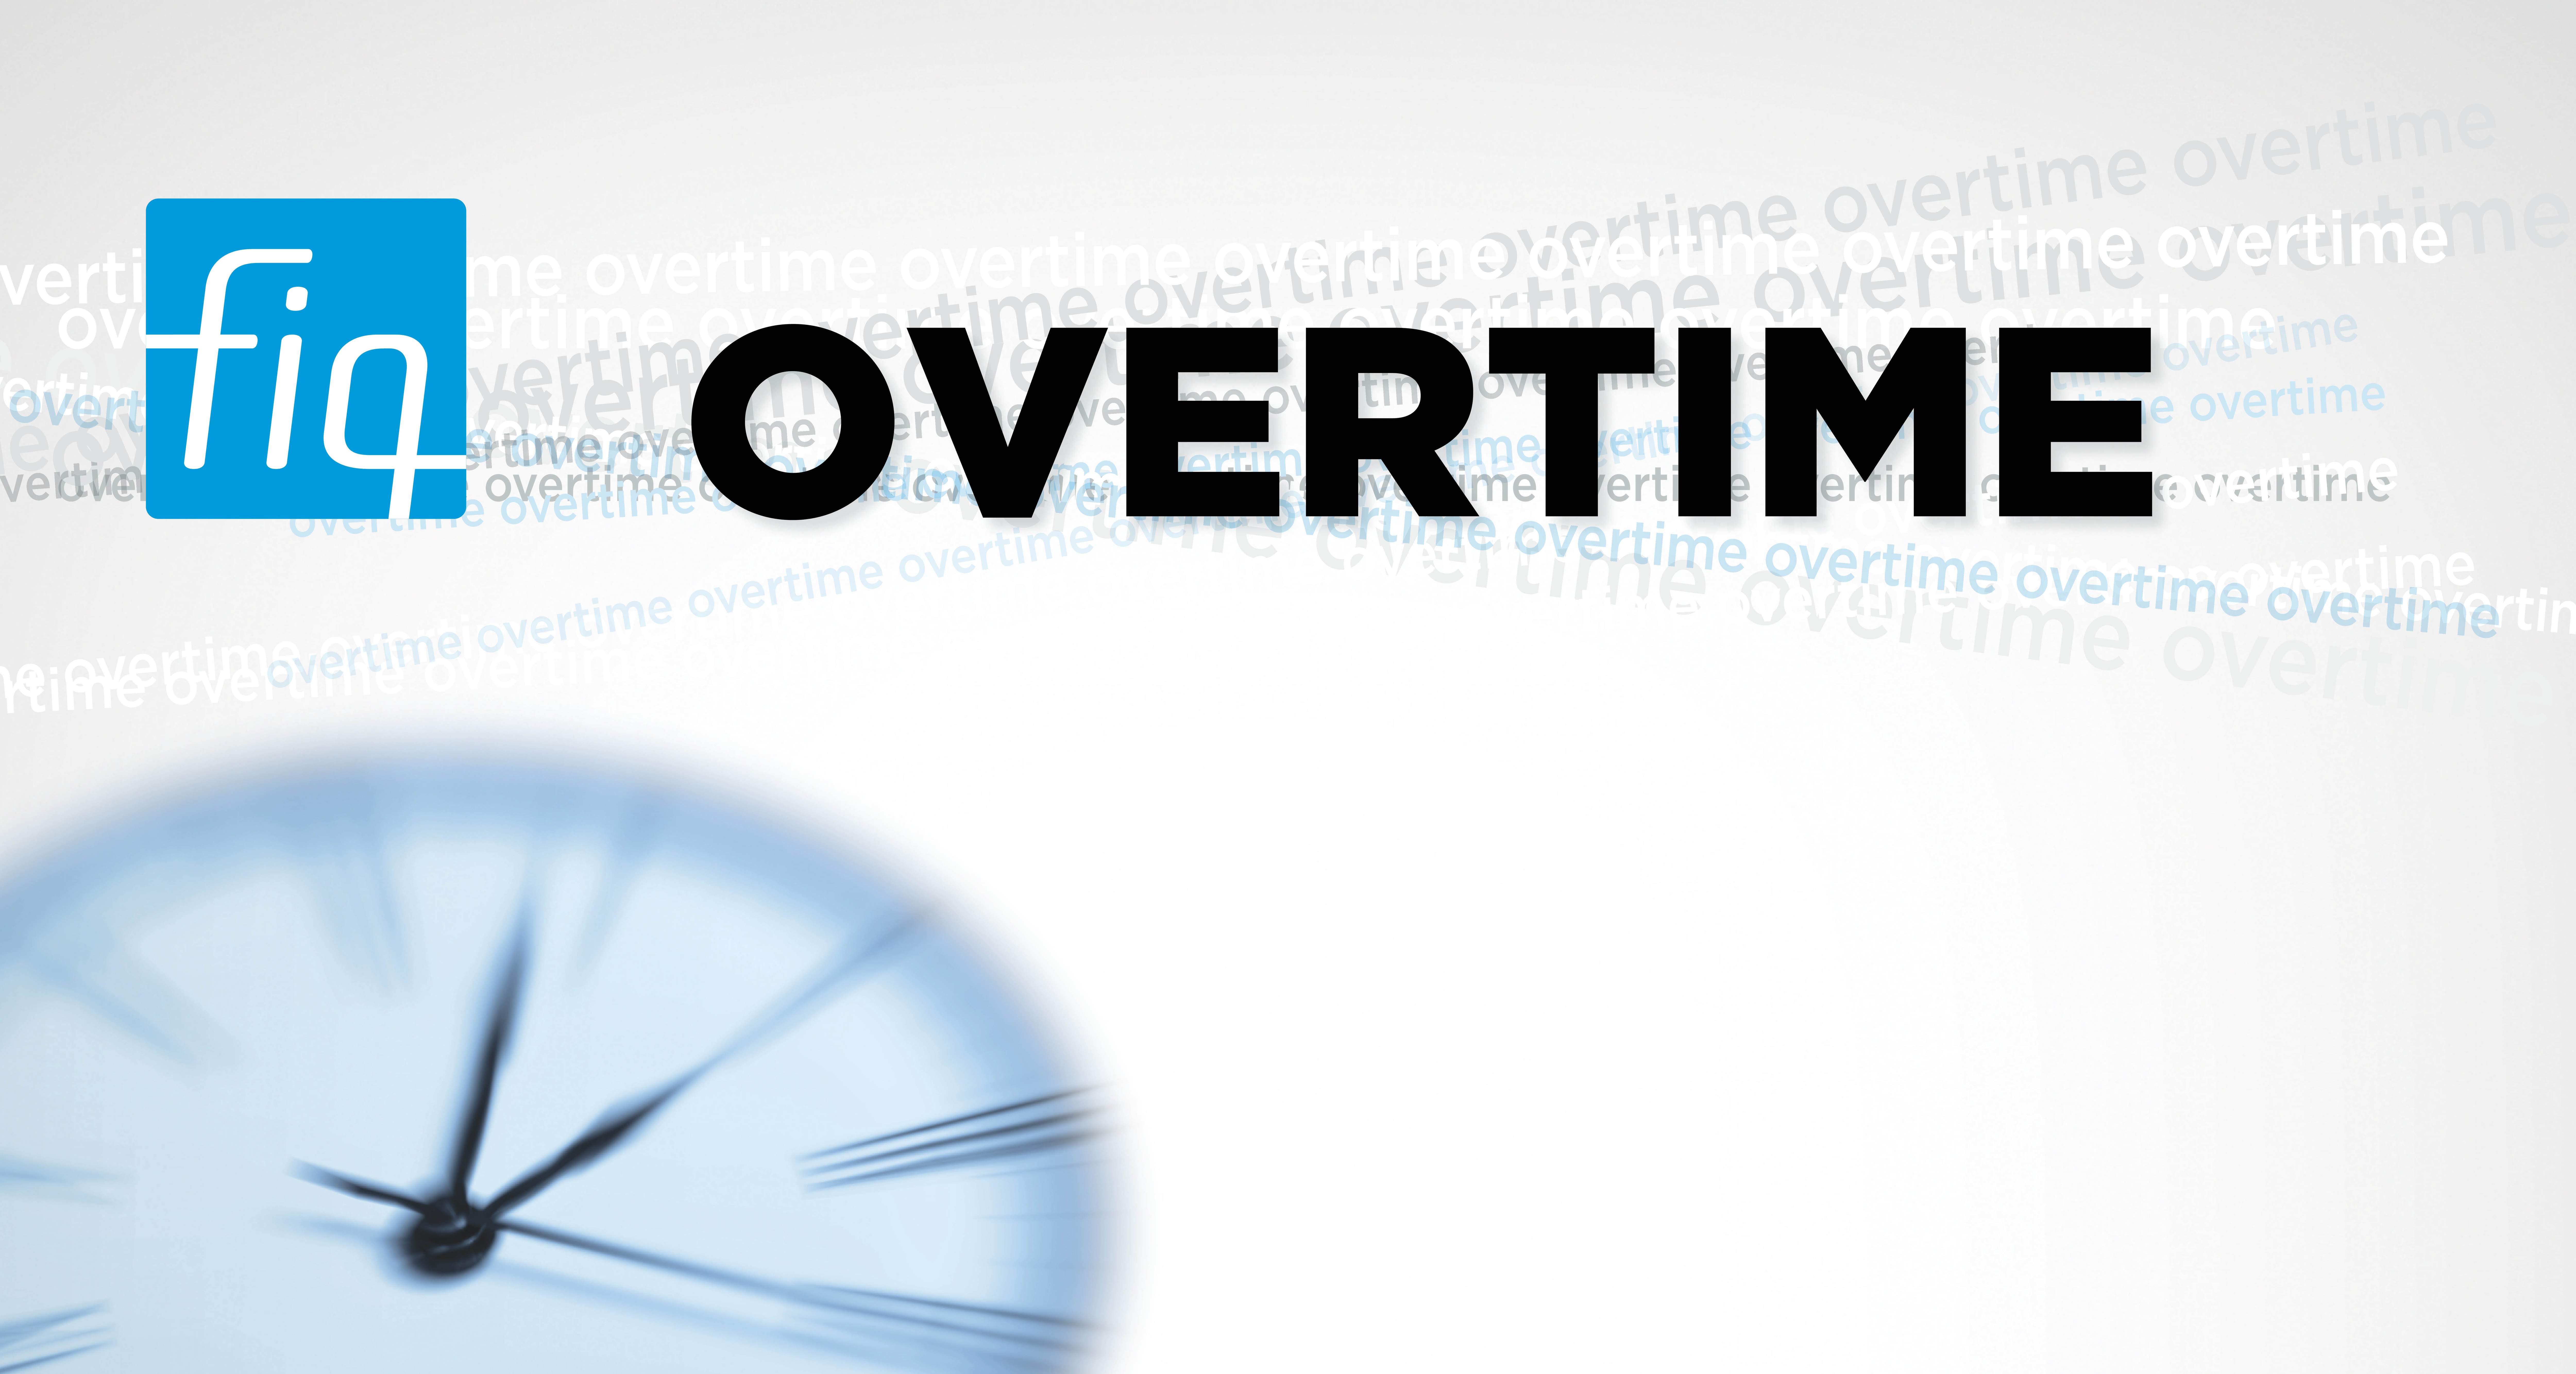 A new leaflet to help fight the use of overtime